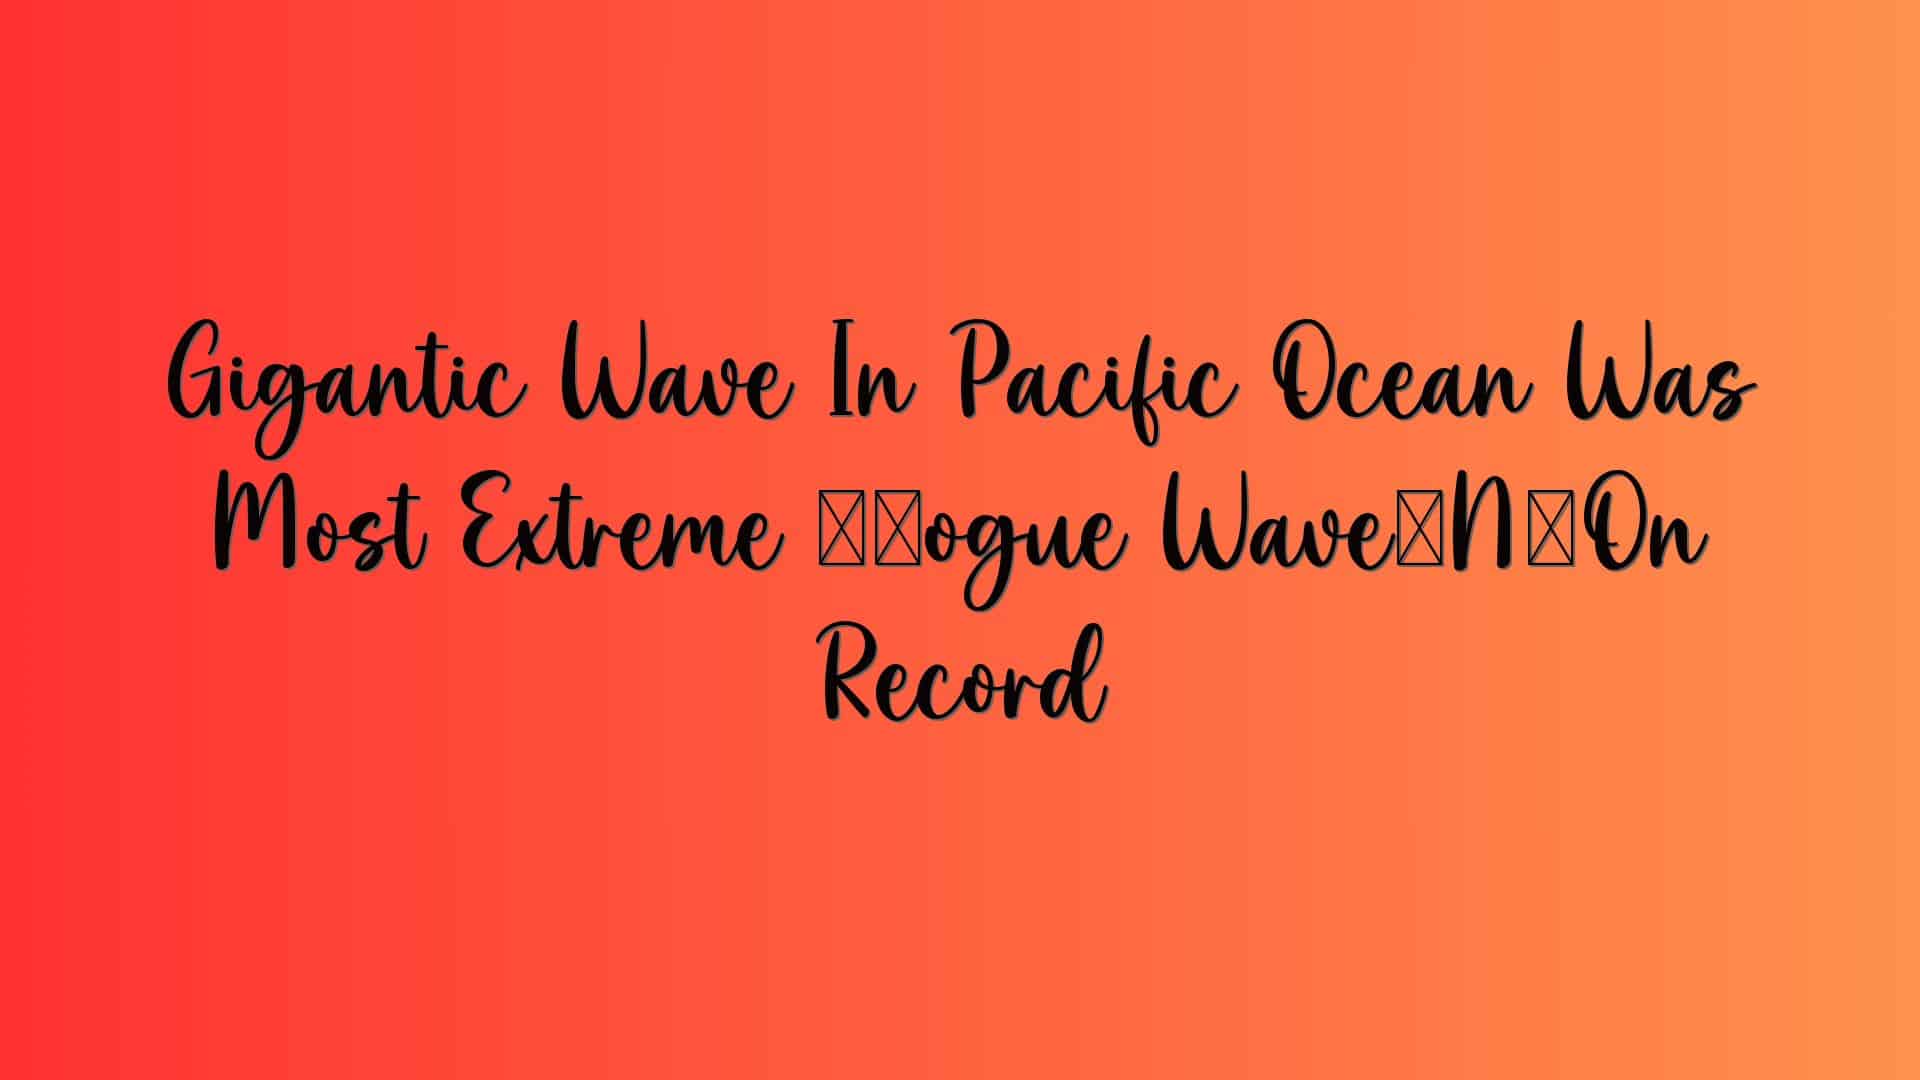 Gigantic Wave In Pacific Ocean Was Most Extreme ‘Rogue Wave’ On Record